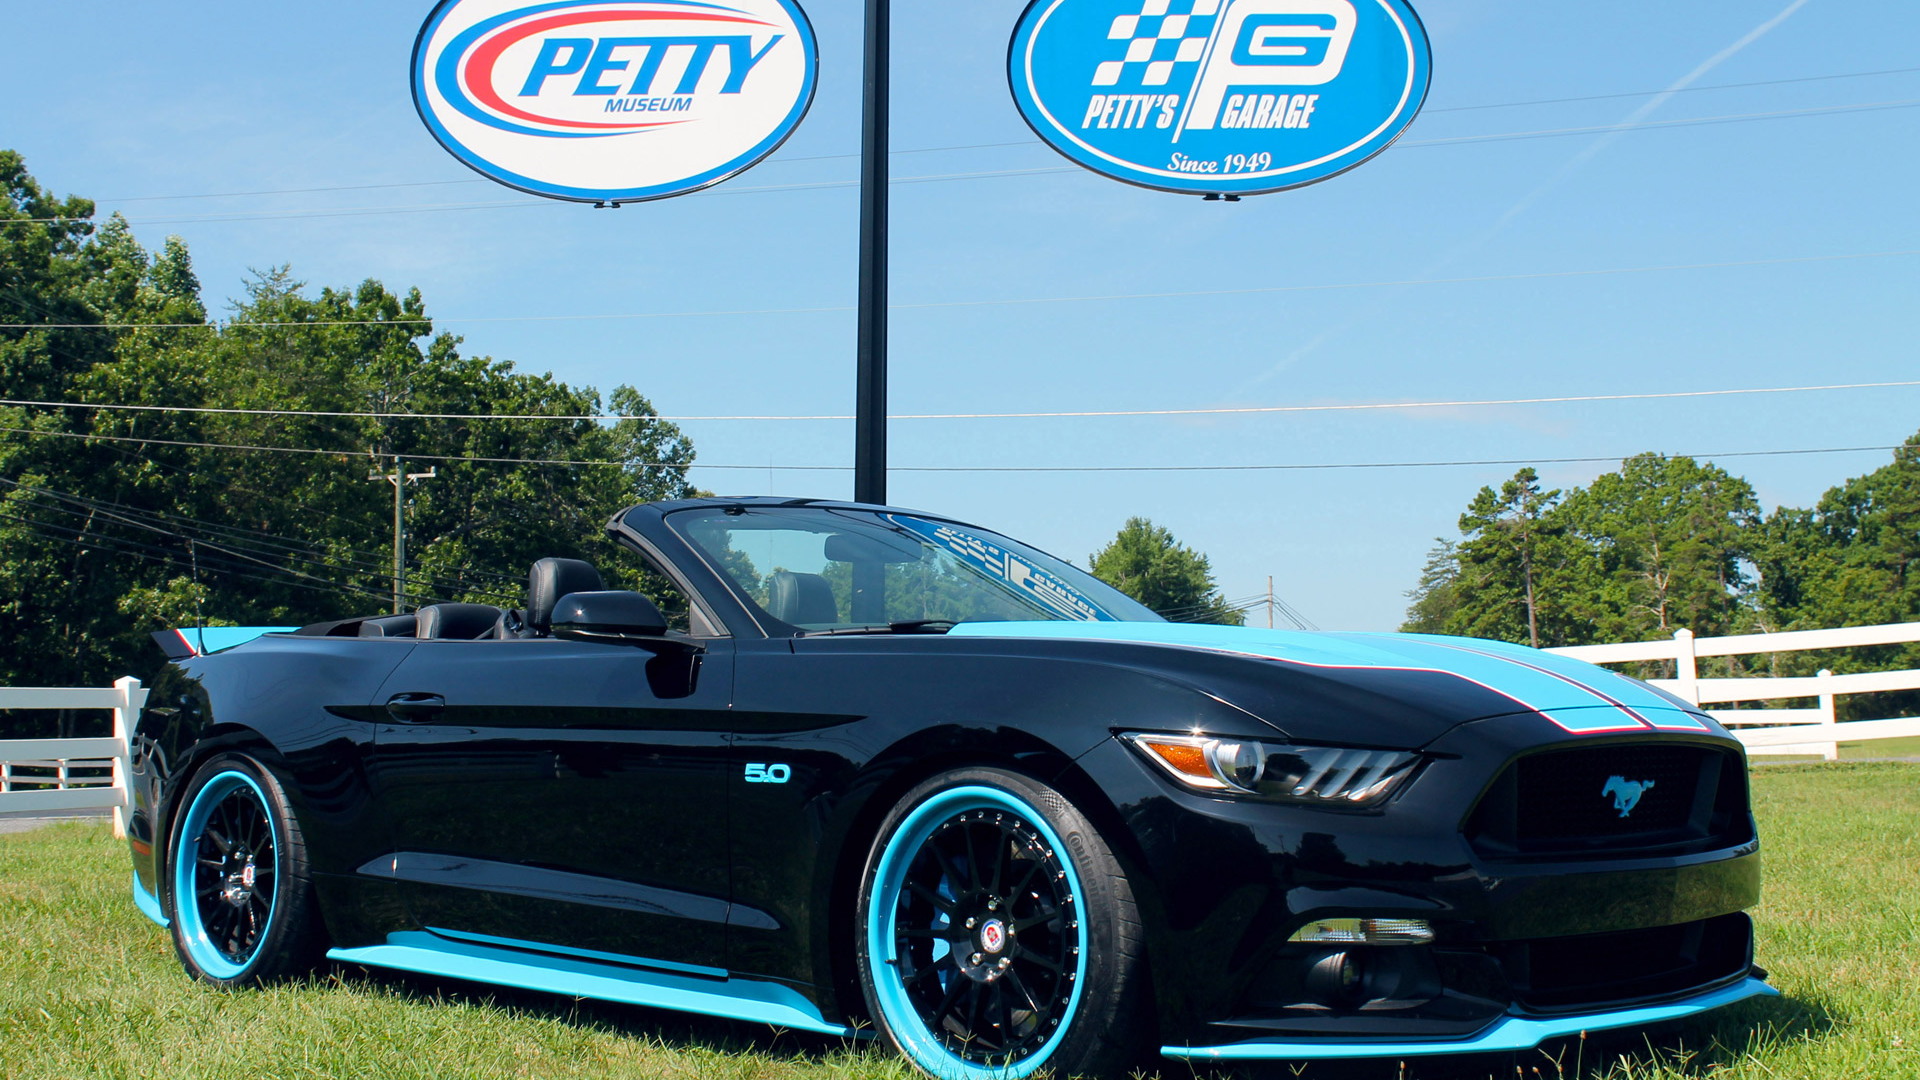 Petty’s Garage 2016 Mustang GT King Edition